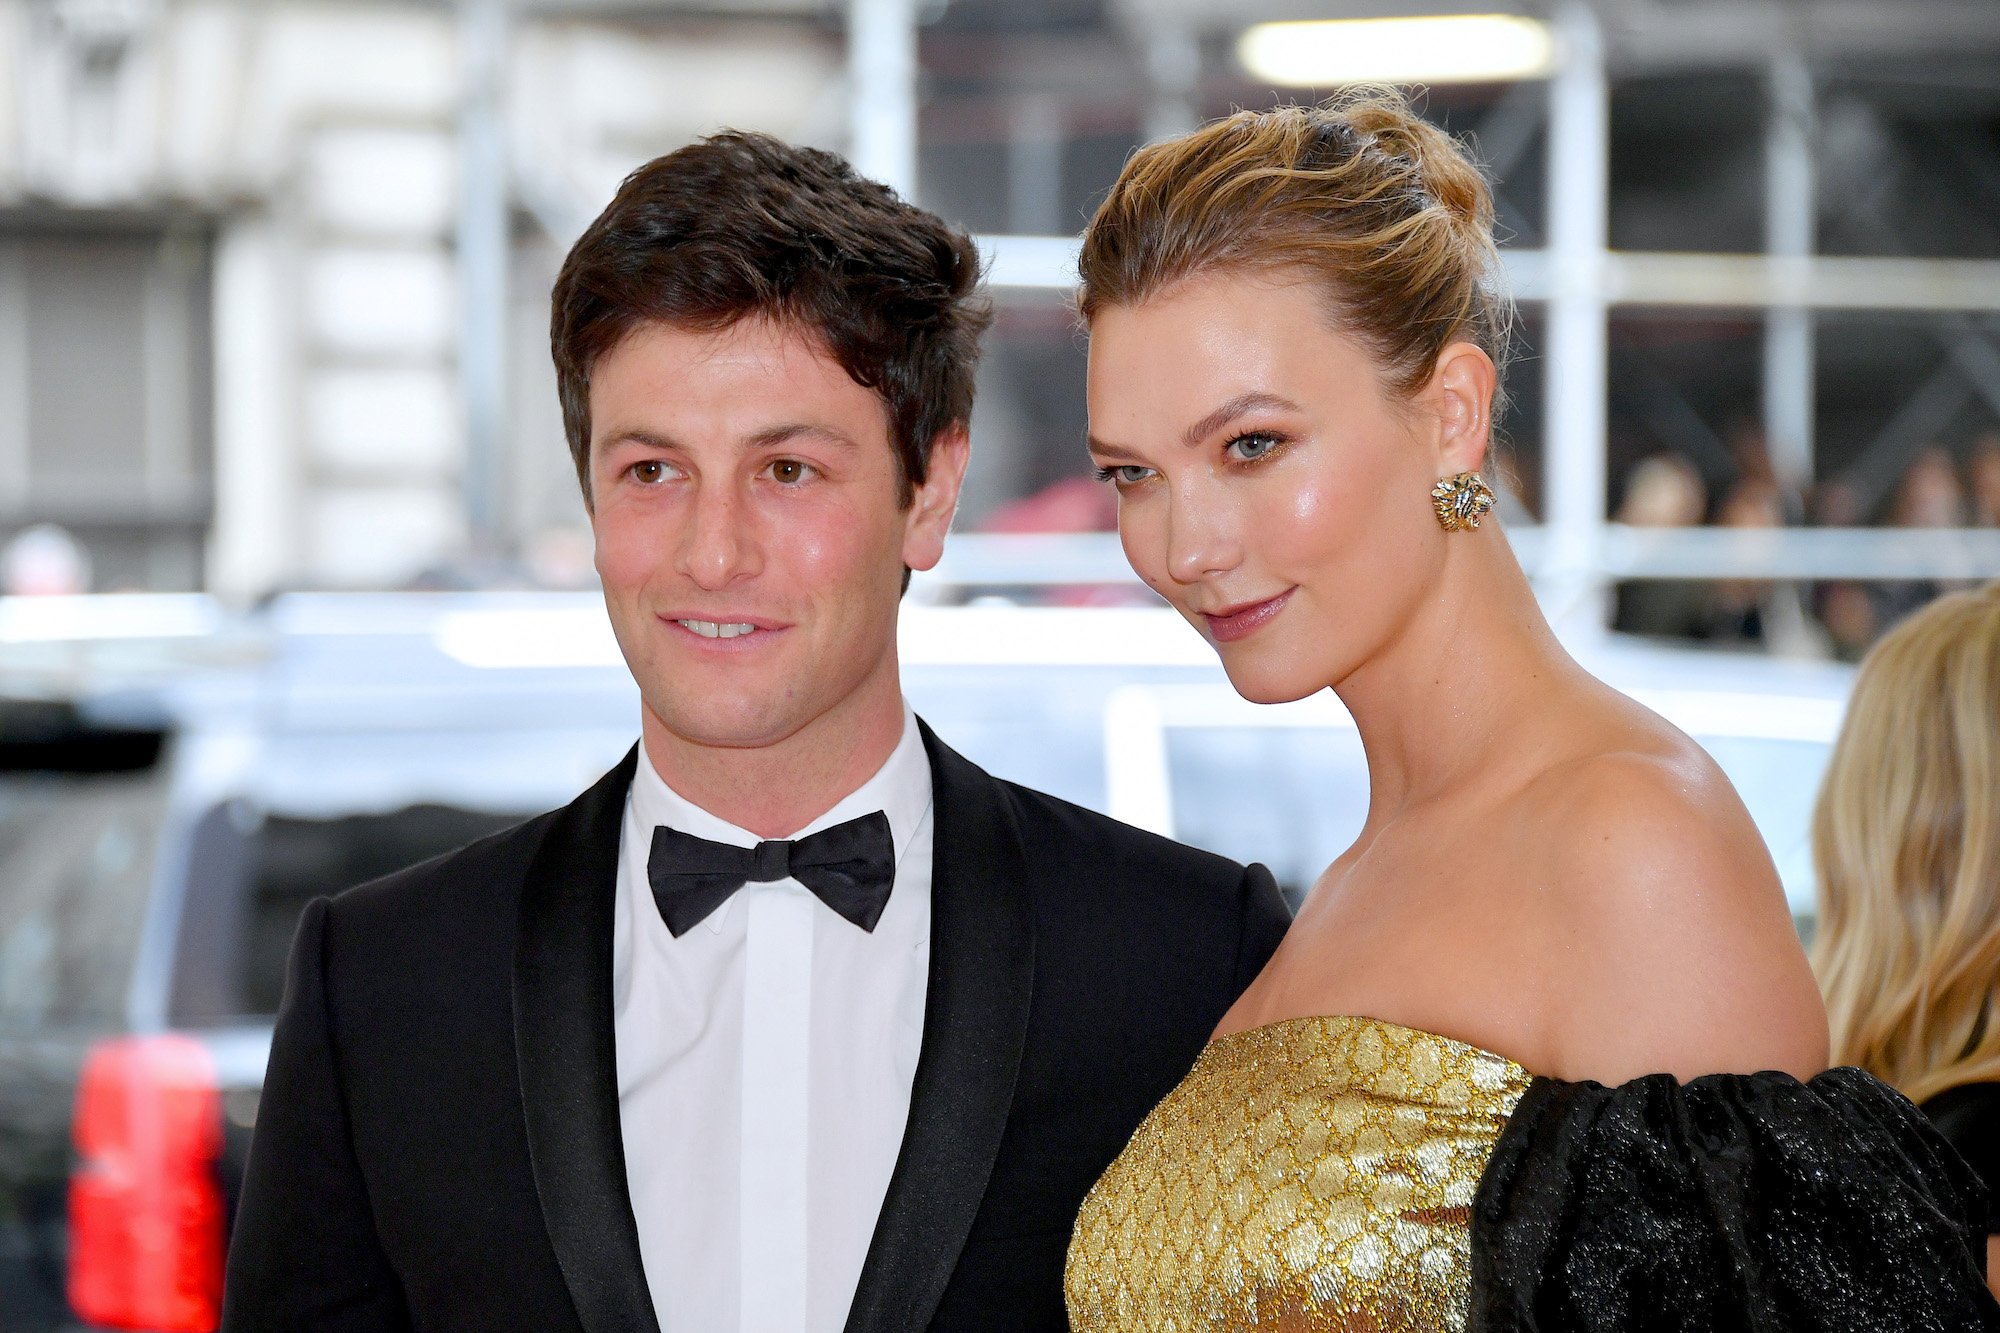 (L-R) Joshua Kushner and Karlie Kloss smiling in front of a blurred background